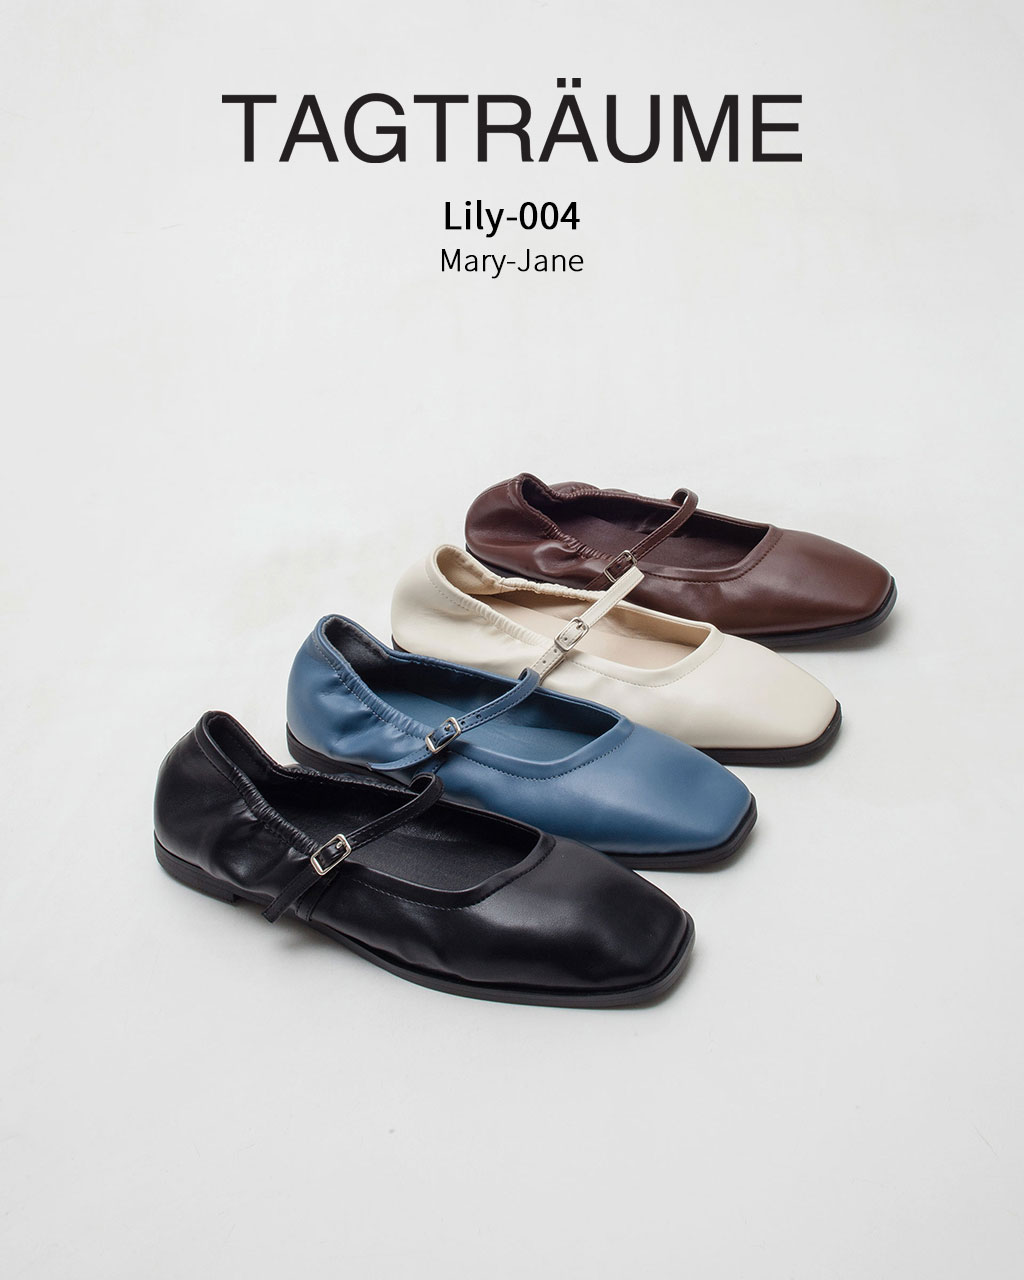 Tagtraume Lily-004 - 0